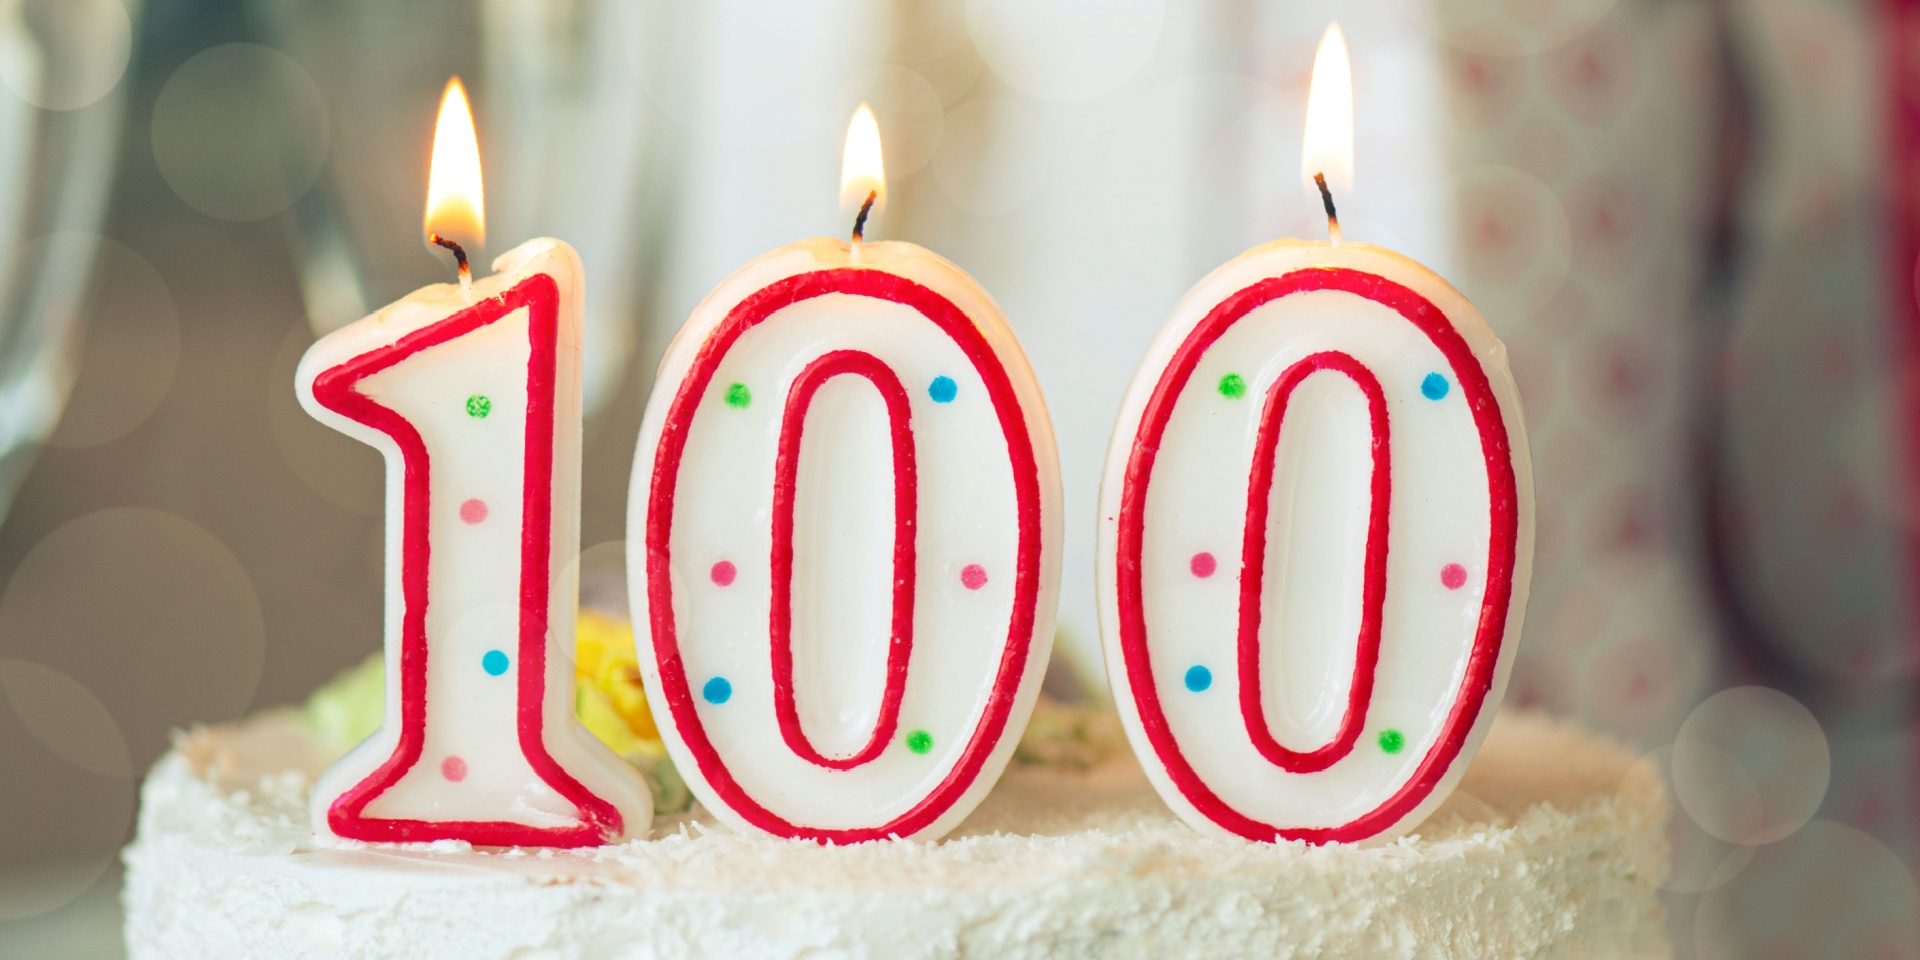 A birthday cake with a “100” candle on it